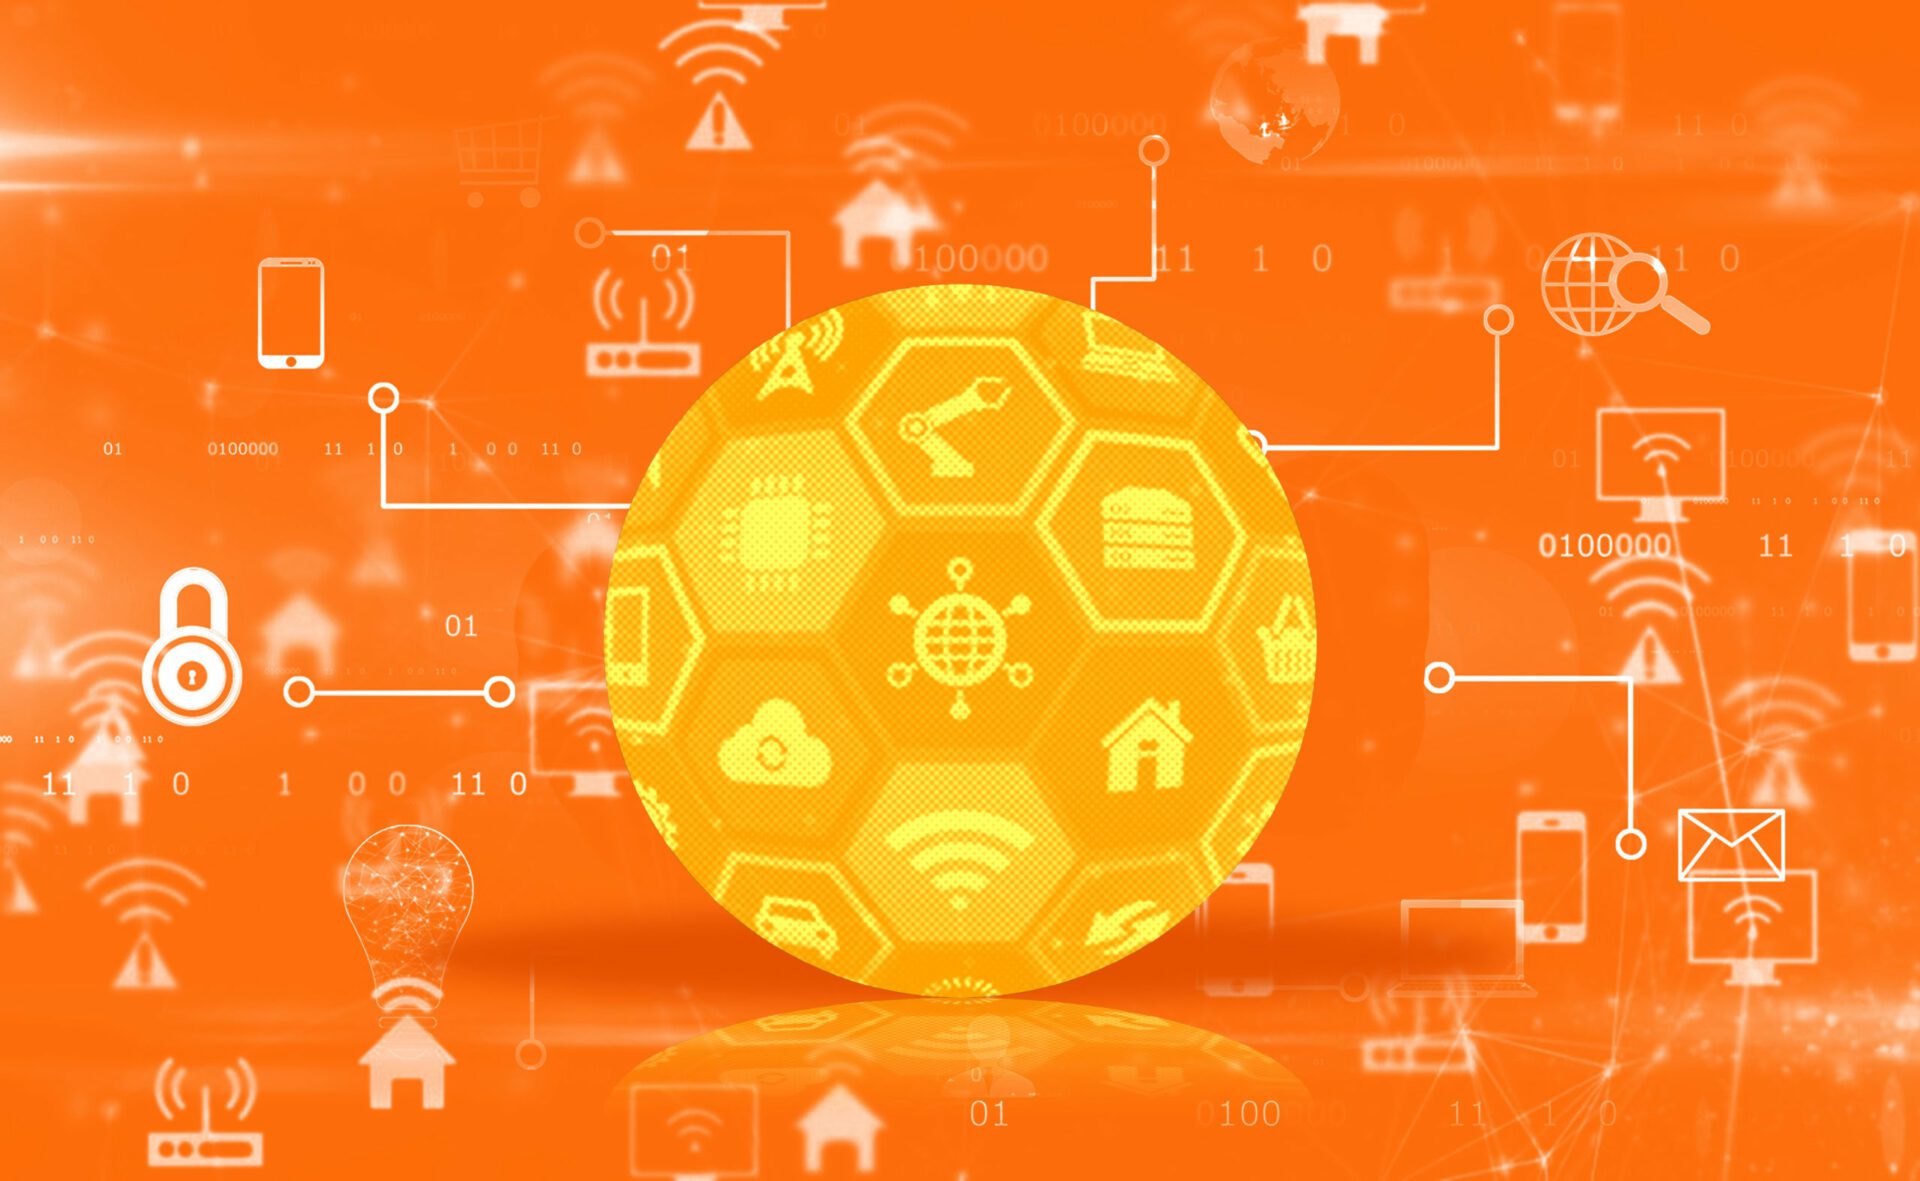 Benefits of Implementing NDN in IoT